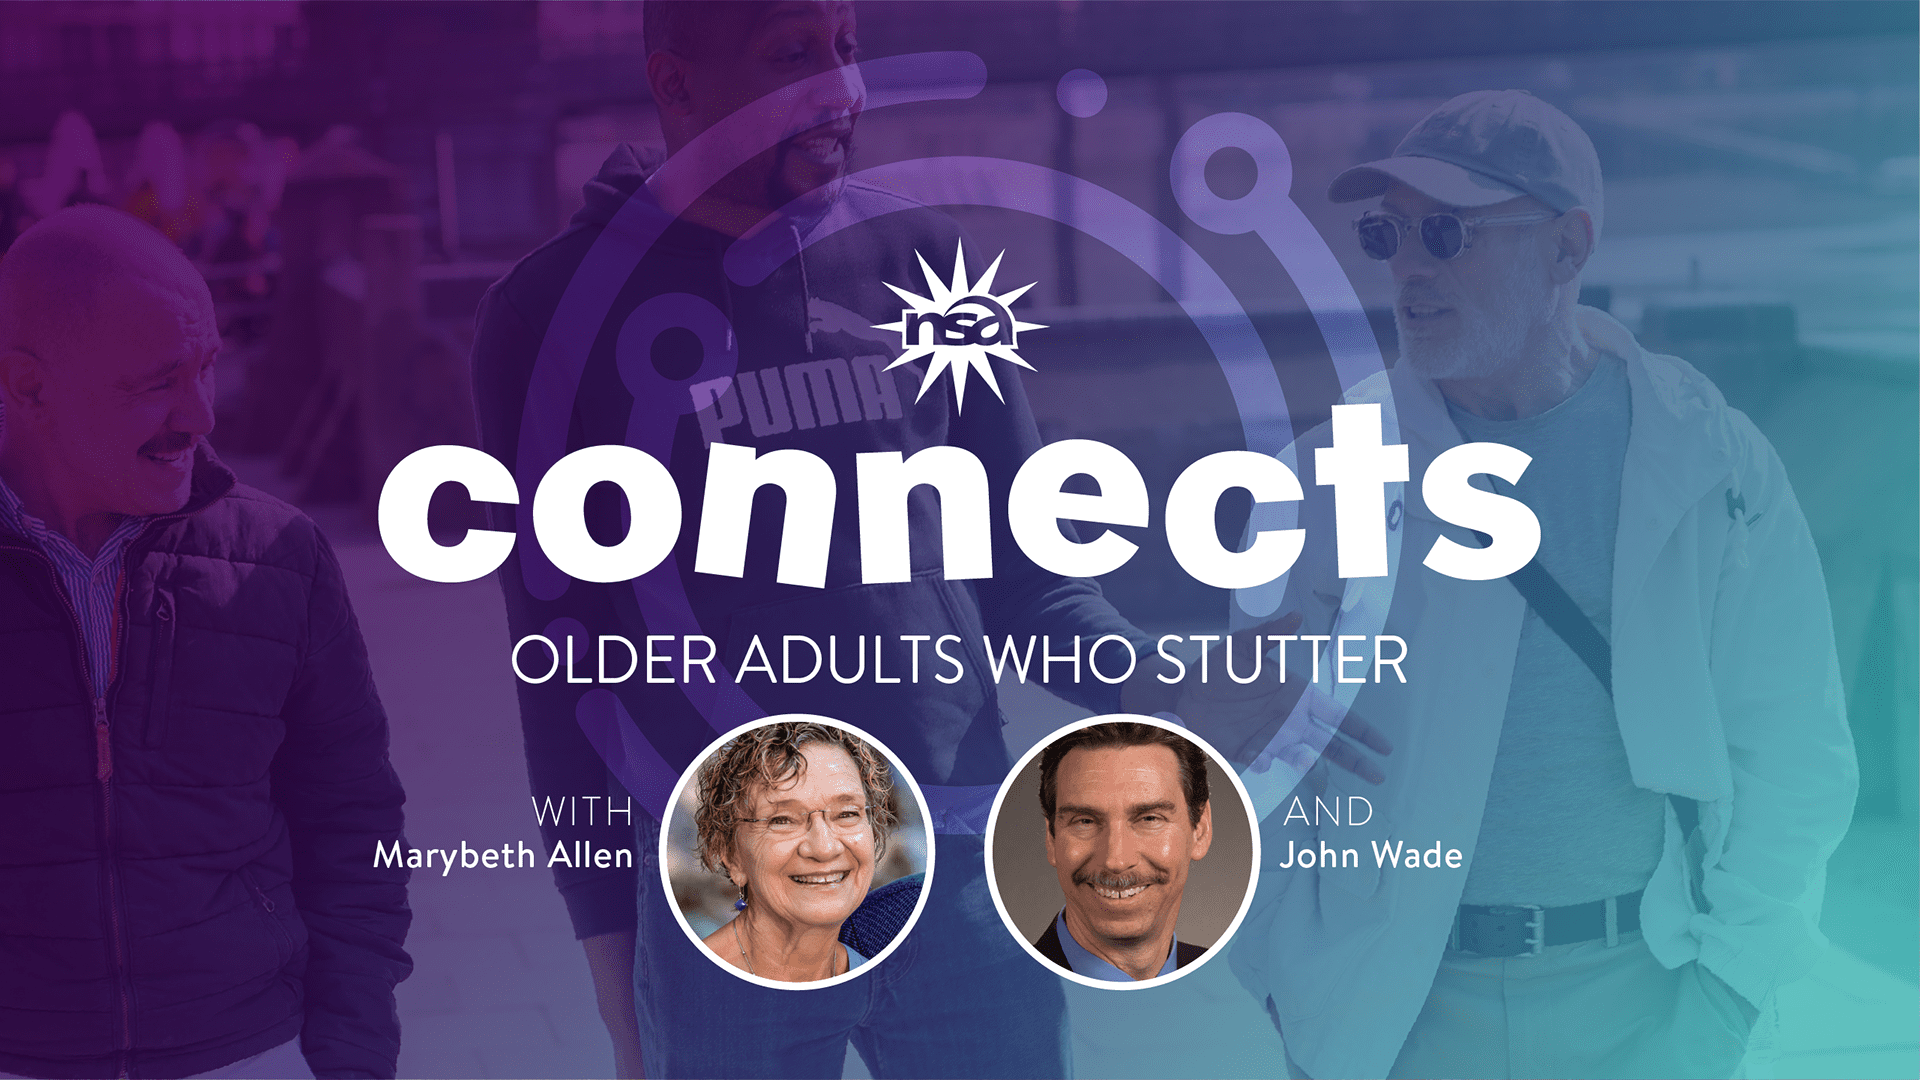 A banner featuring the text "NSA Connects: Older Adults Who Stutter" with Marybeth Allen and John Wade. The background shows three older adults conversing and smiling outdoors, while small circular photos of Marybeth Allen and John Wade are at the bottom, highlighting their participation.